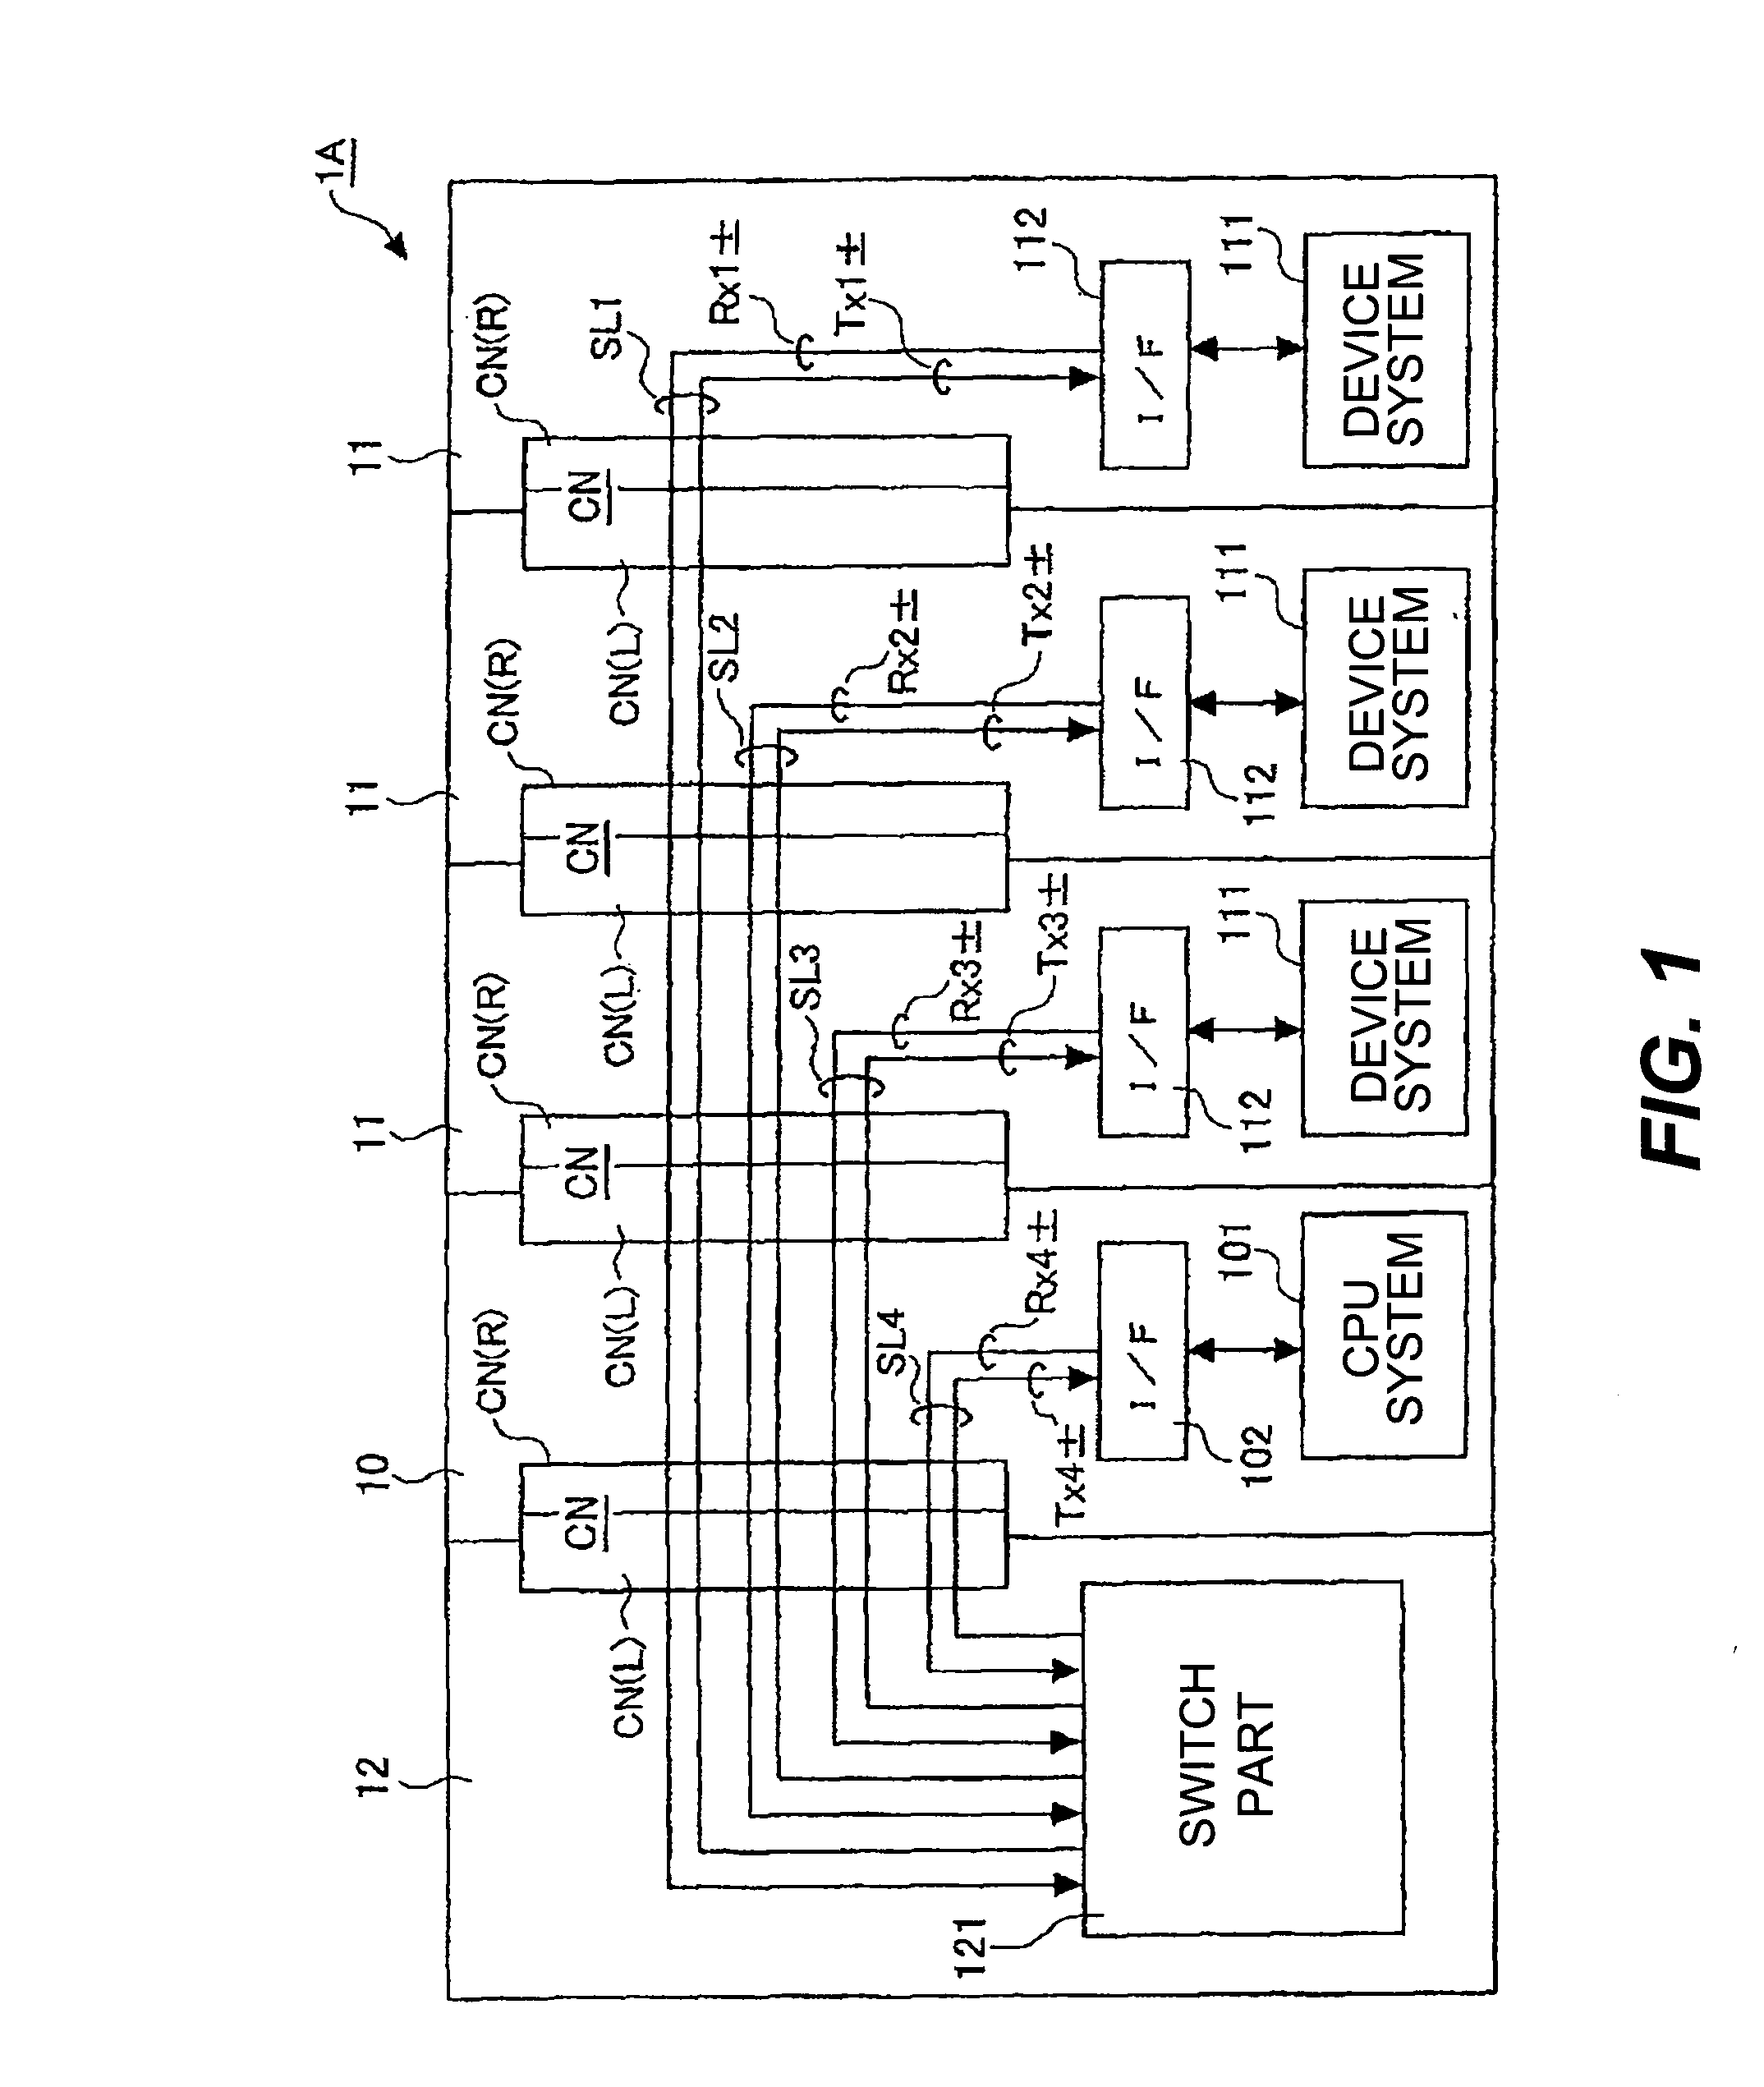 Programmable controller with building blocks